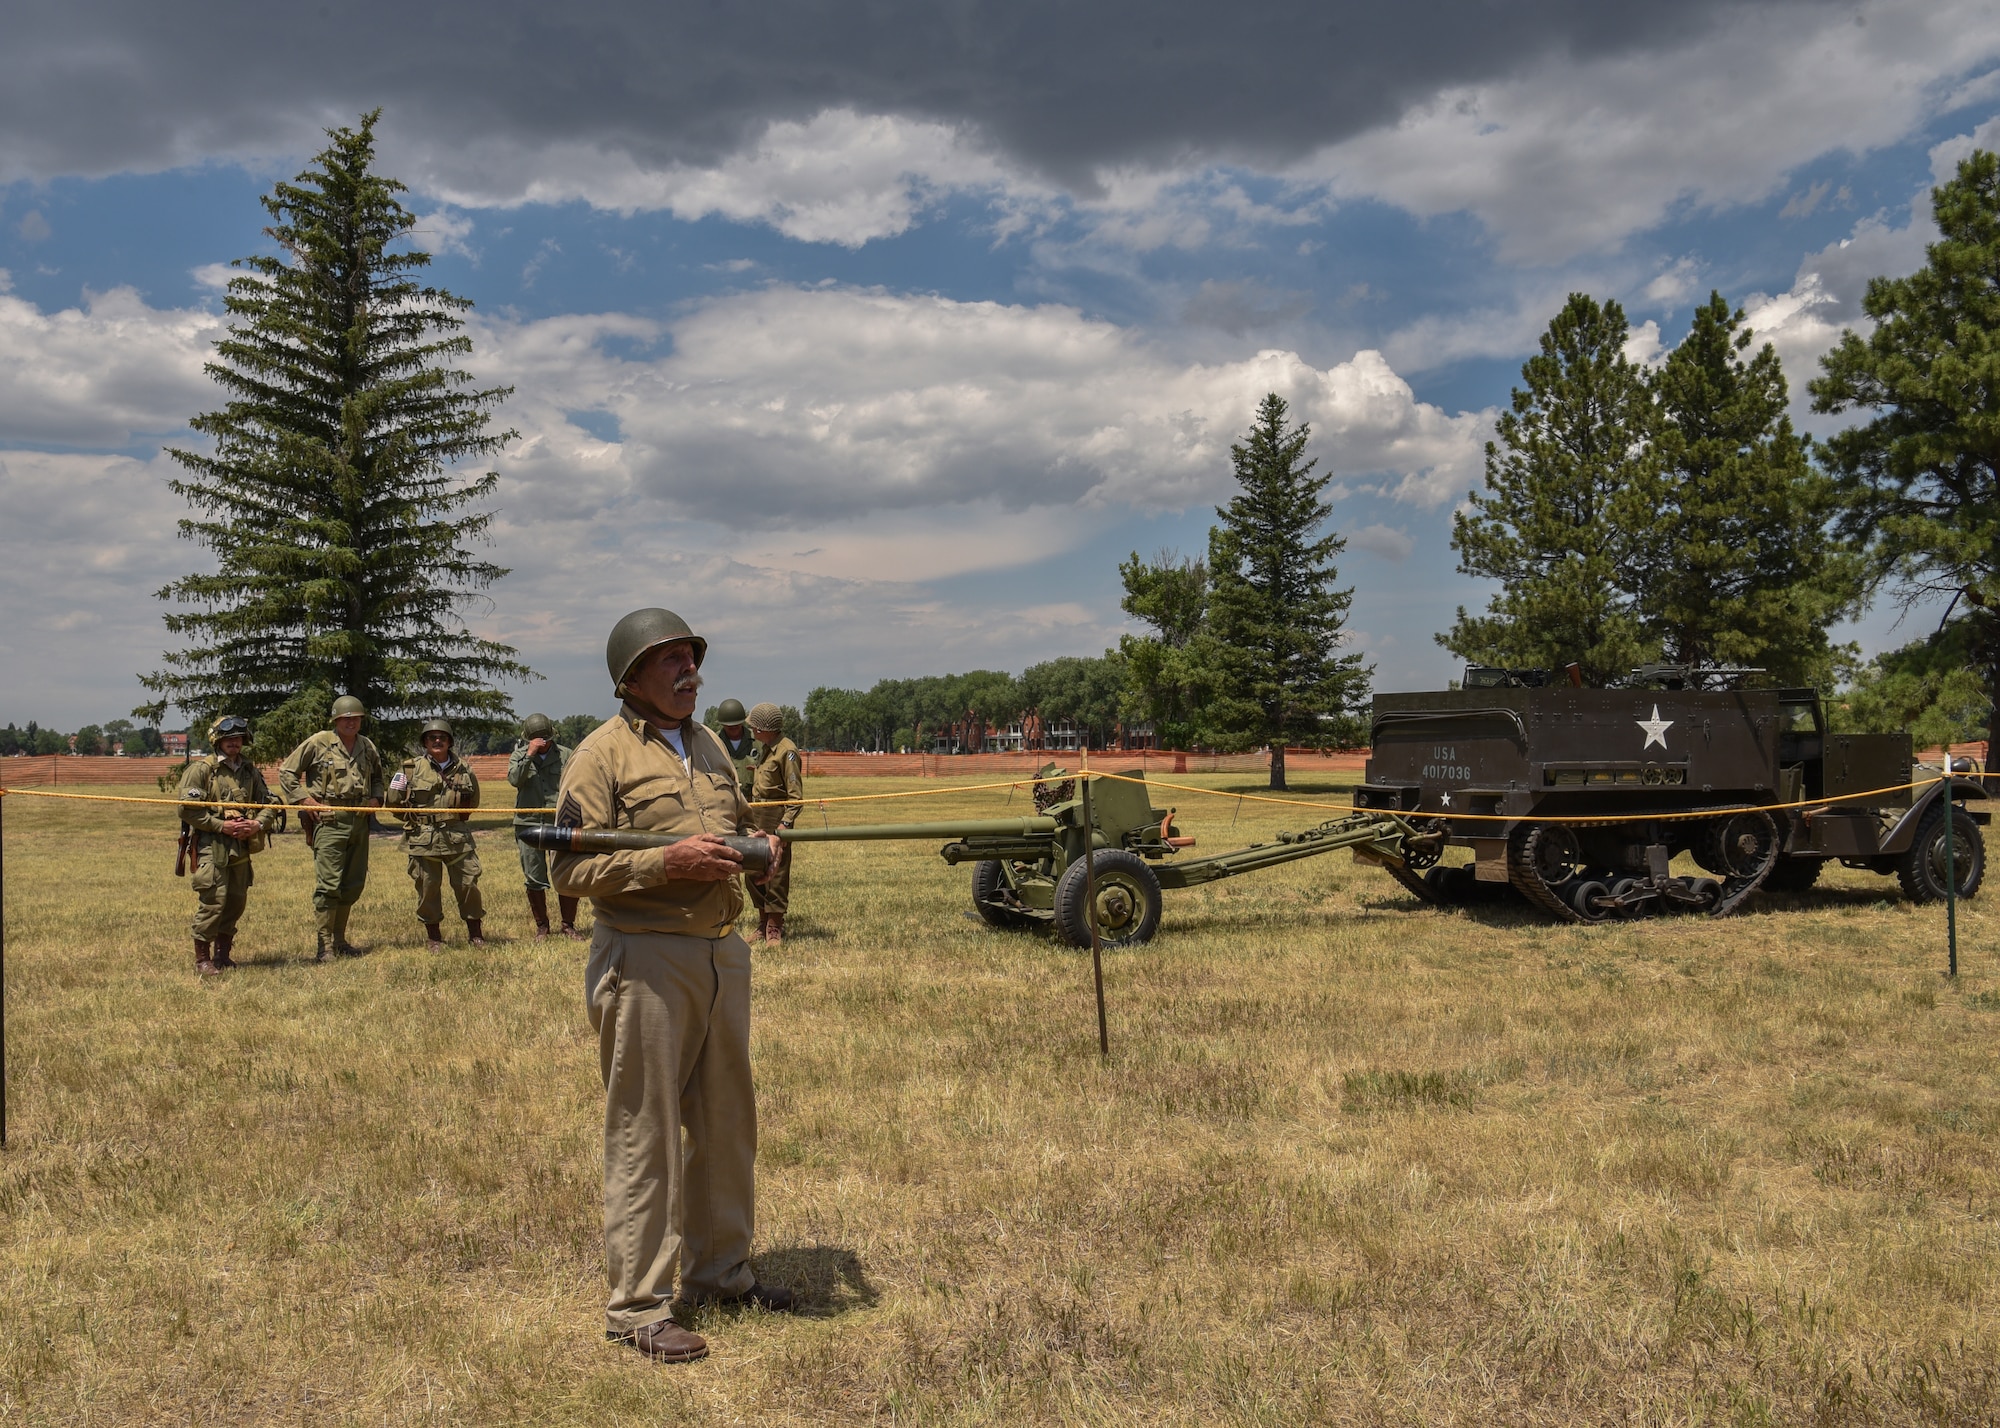 Norman Hughes a World War II re-enactor talks about the ammunition the anti-tank gun uses, during Fort D. A. Russell days on F.E. Warren Air Force Base, Wyo., July 21, 2018. From 1930 to 1949, the base was used as an infantry and artillery training post. The annual open house brings military and civilian communities together to learn more about the base's rich history. (U.S. Air Force photo by Airman 1st Class Braydon Williams)